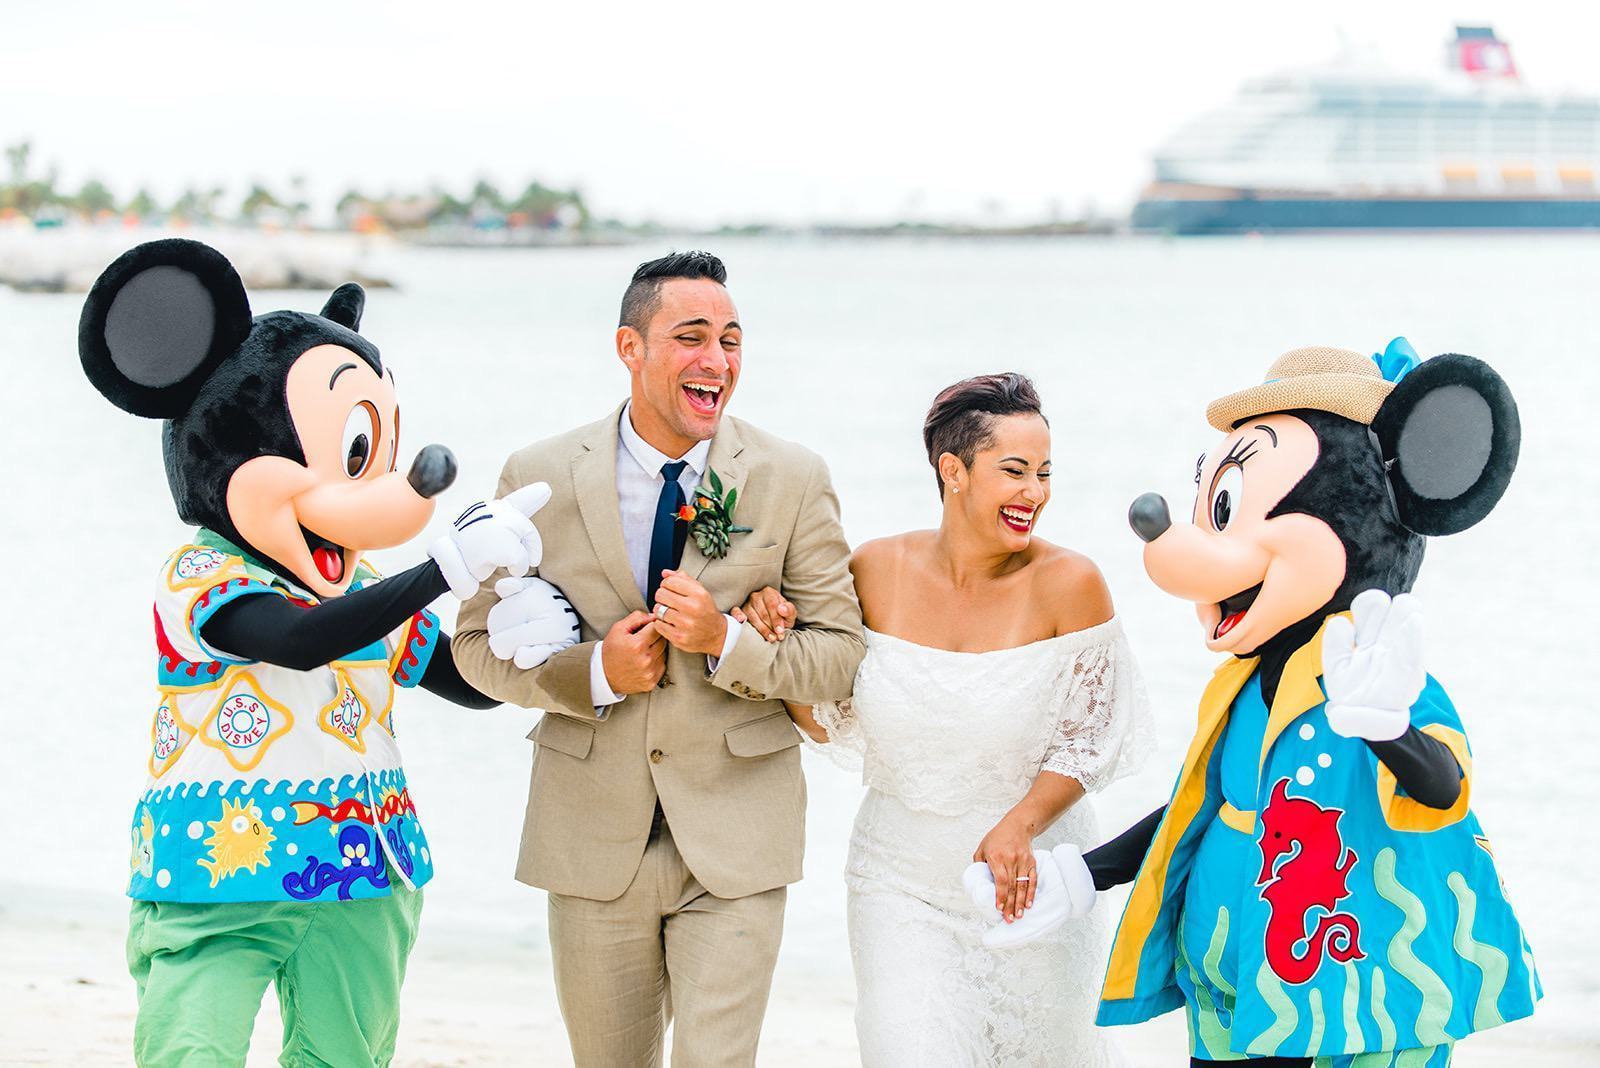 A couple gets married in Disney's original television series, 'Disney Fairy Tale Weddings'